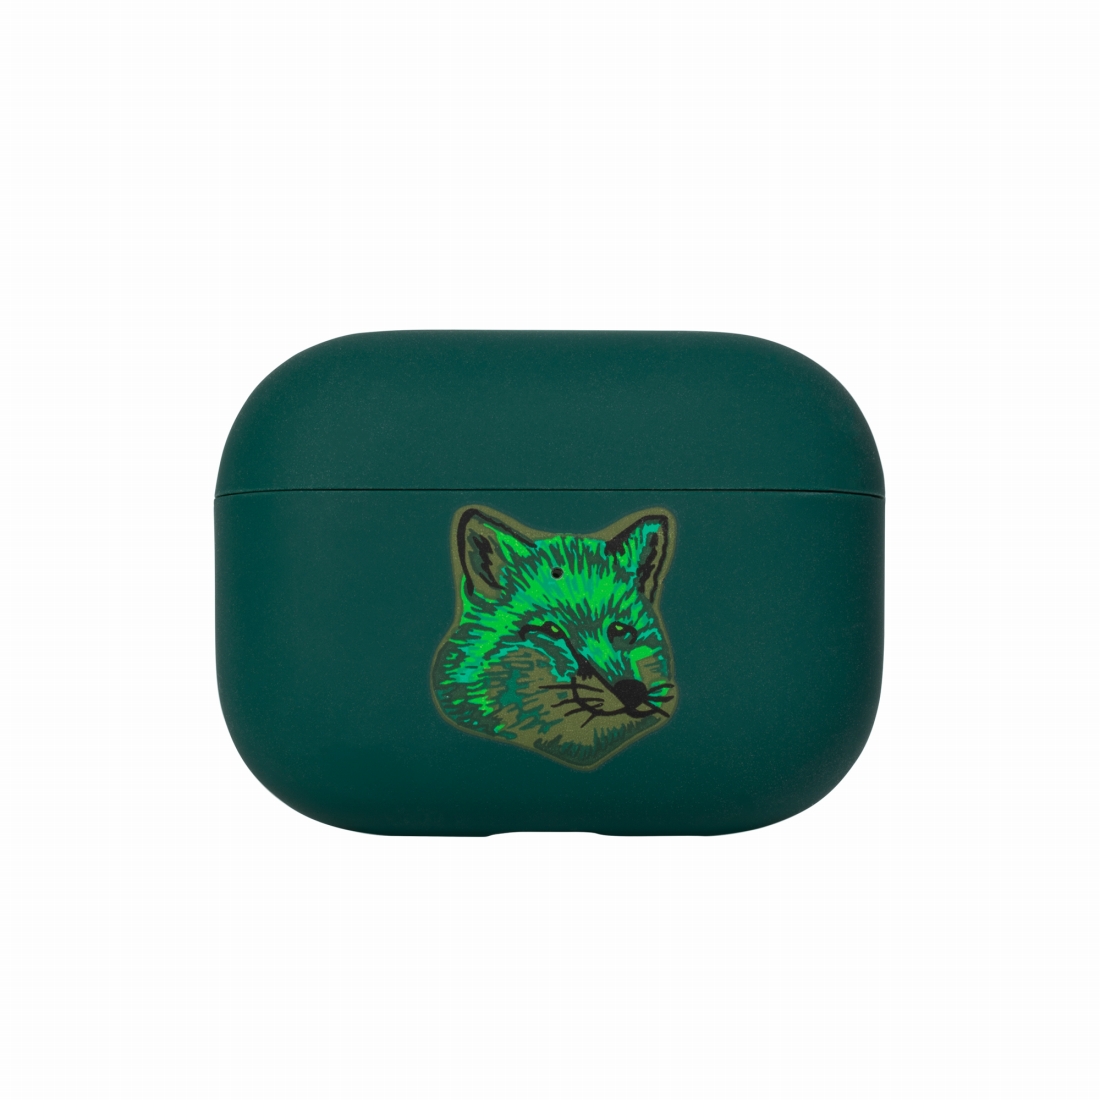 NATIVE UNION×MAISON KITSUNE GREEN FOX CASE FOR Airpods Pro case エアーポッズプロケース  ネイティユニオン × メゾンキツネ | UNBY GENERAL GOODS STORE